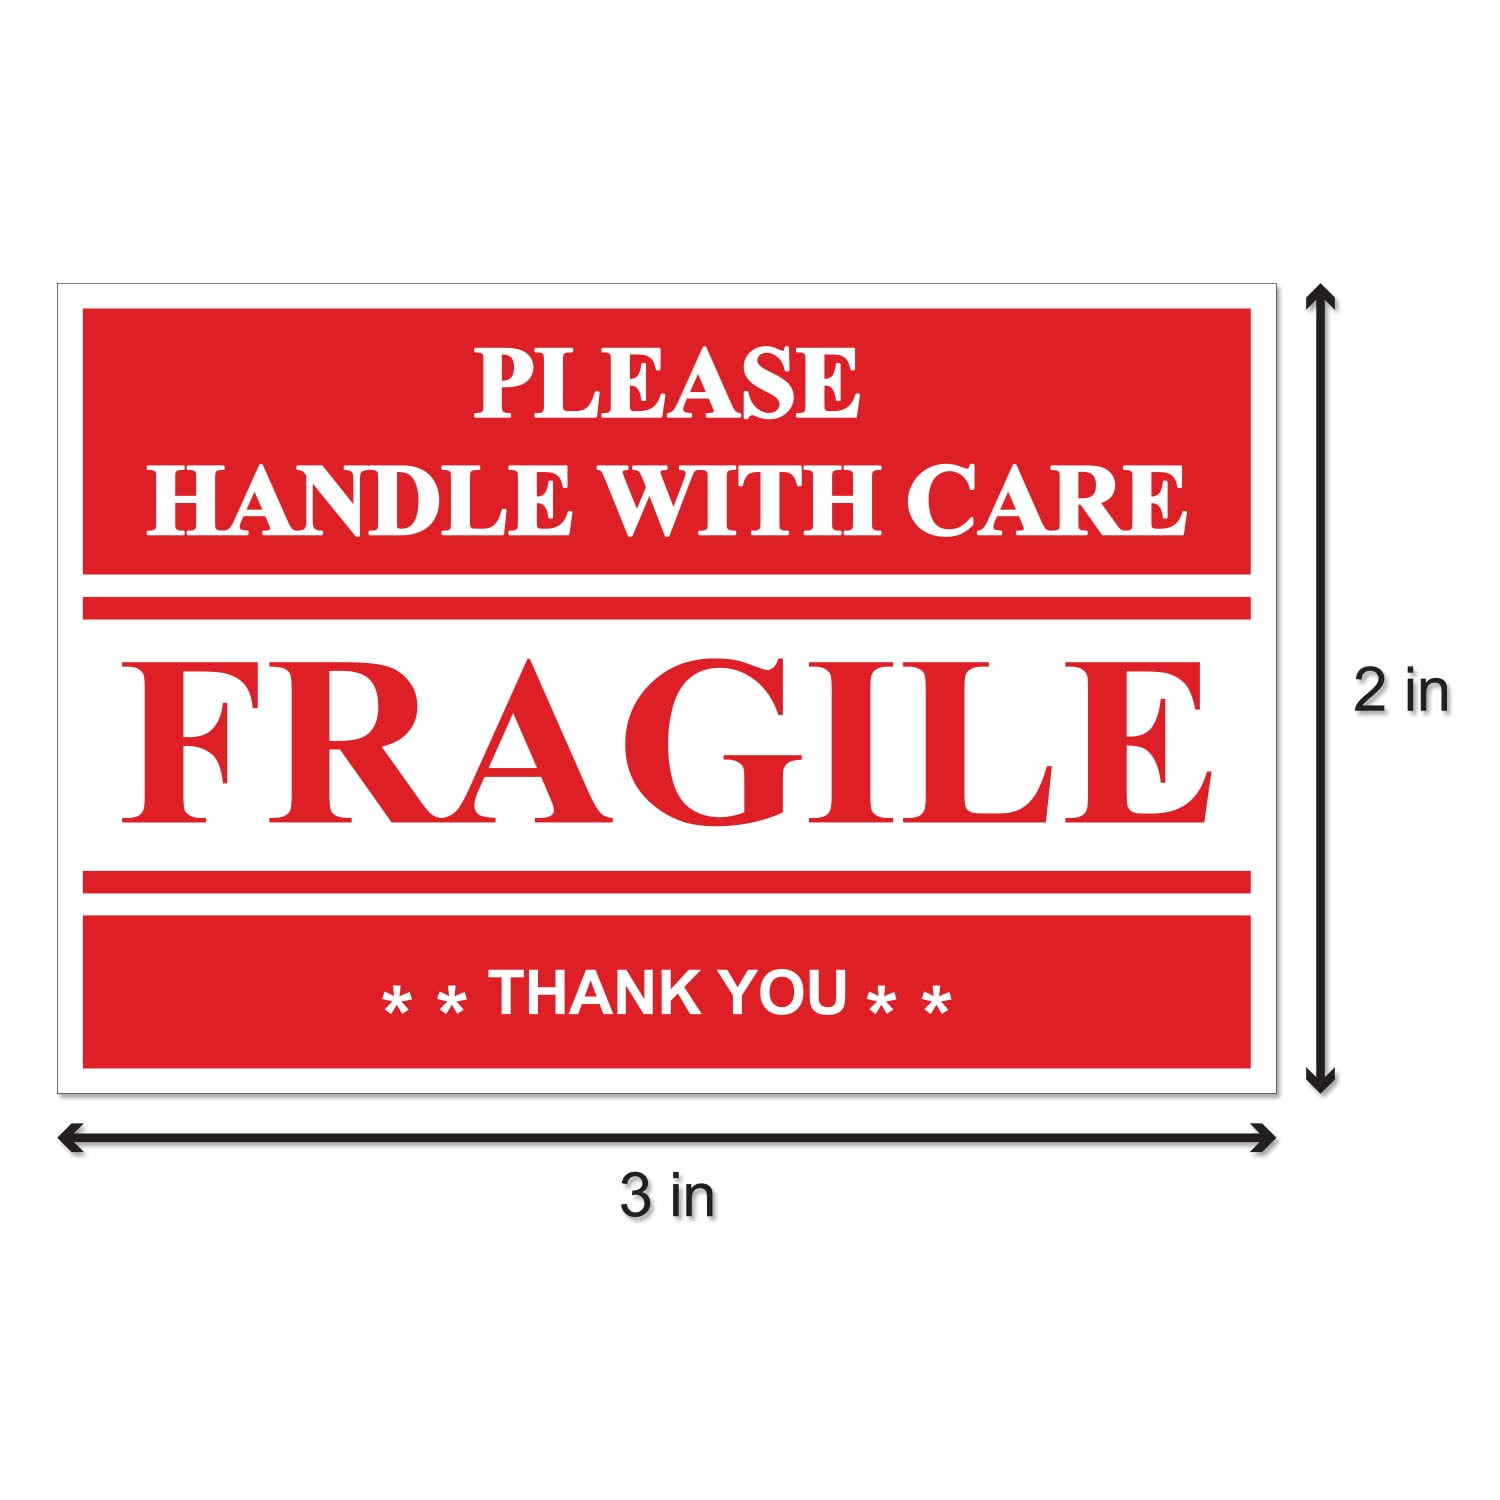 2,000 Fragile Stickers Handle with Care Stickers Size 90x35mm